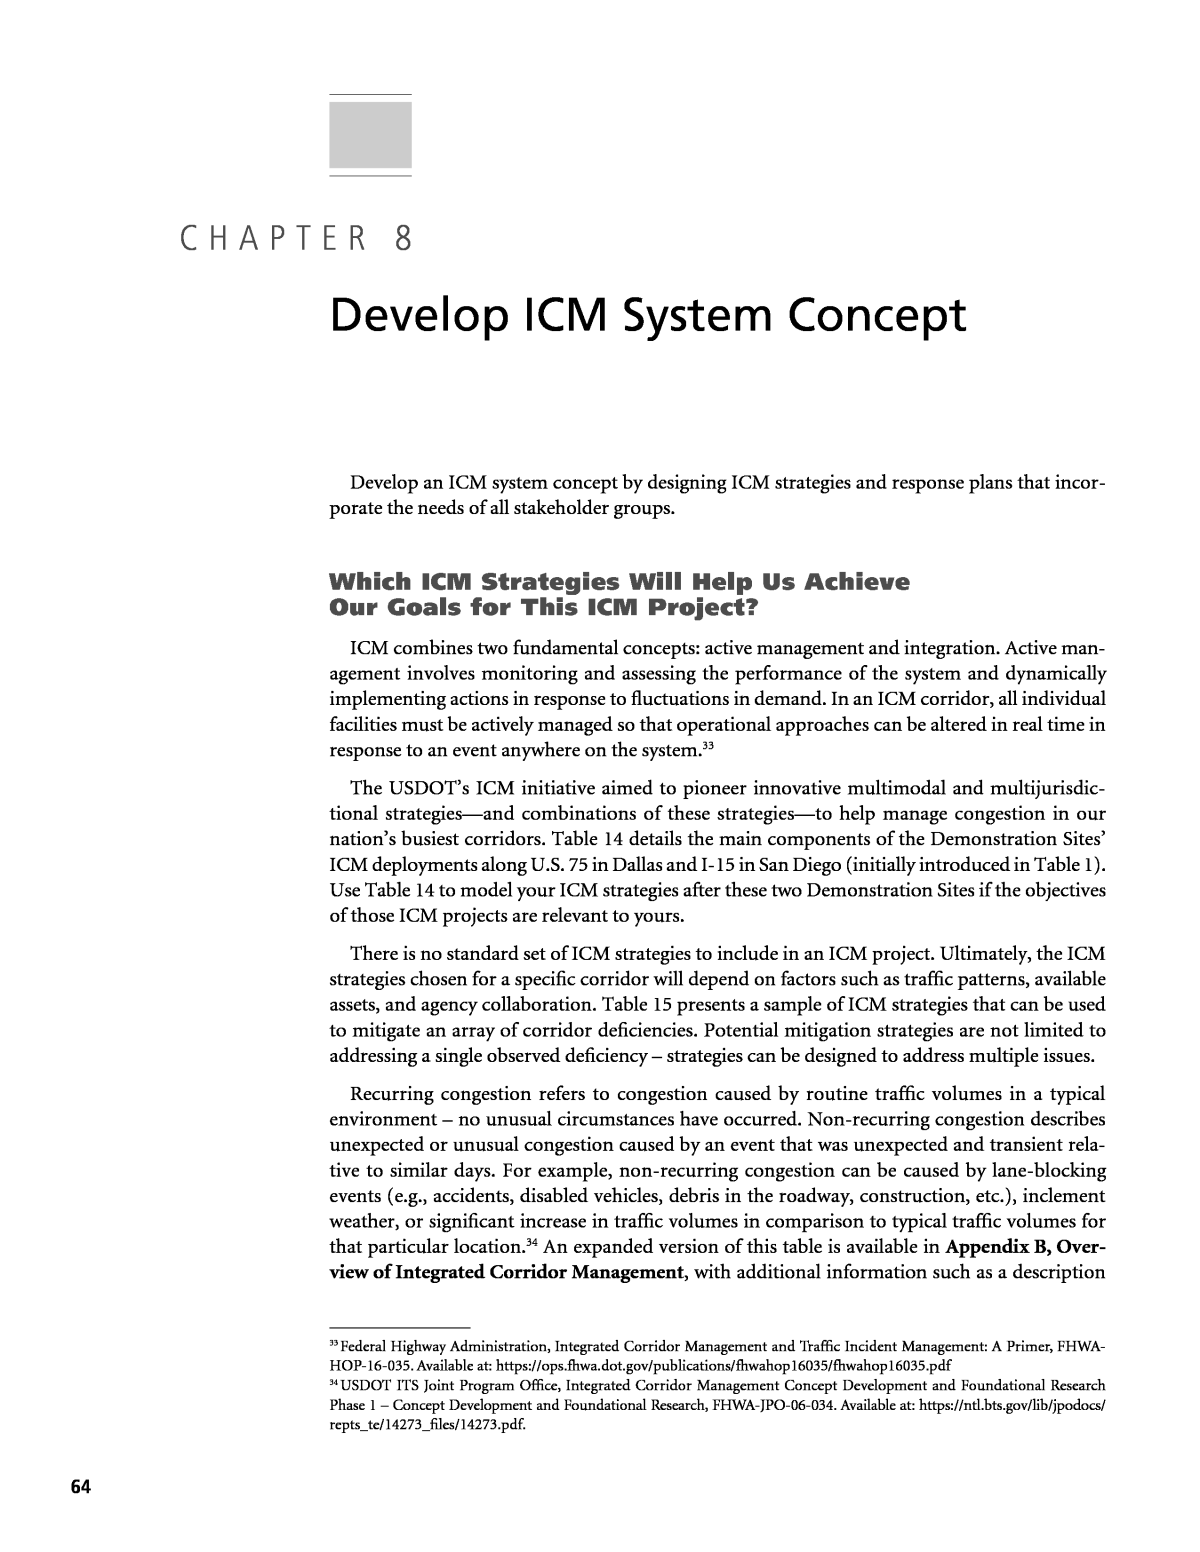 Chapter 8 - Develop ICM System Concept | Broadening Integrated Corridor  Management Stakeholders |The National Academies Press